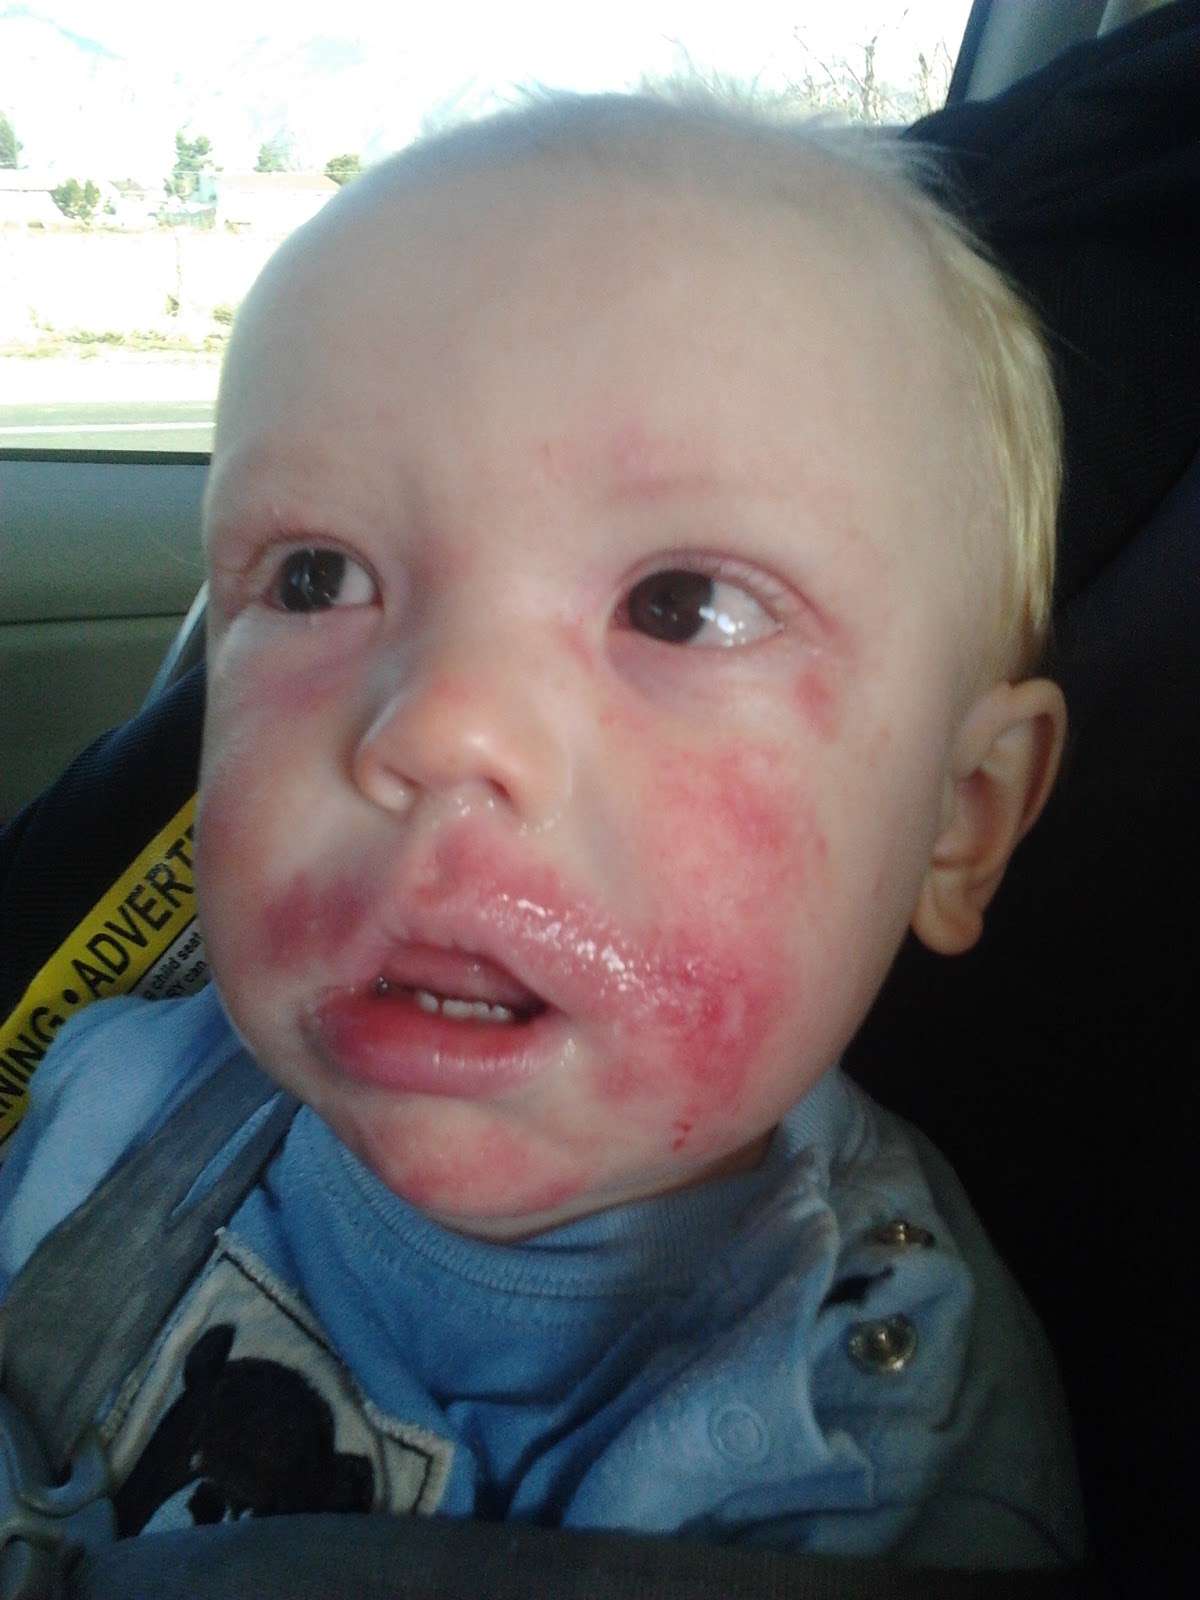 Adams Family: Severe Allergy Induced Eczema On My Infant.